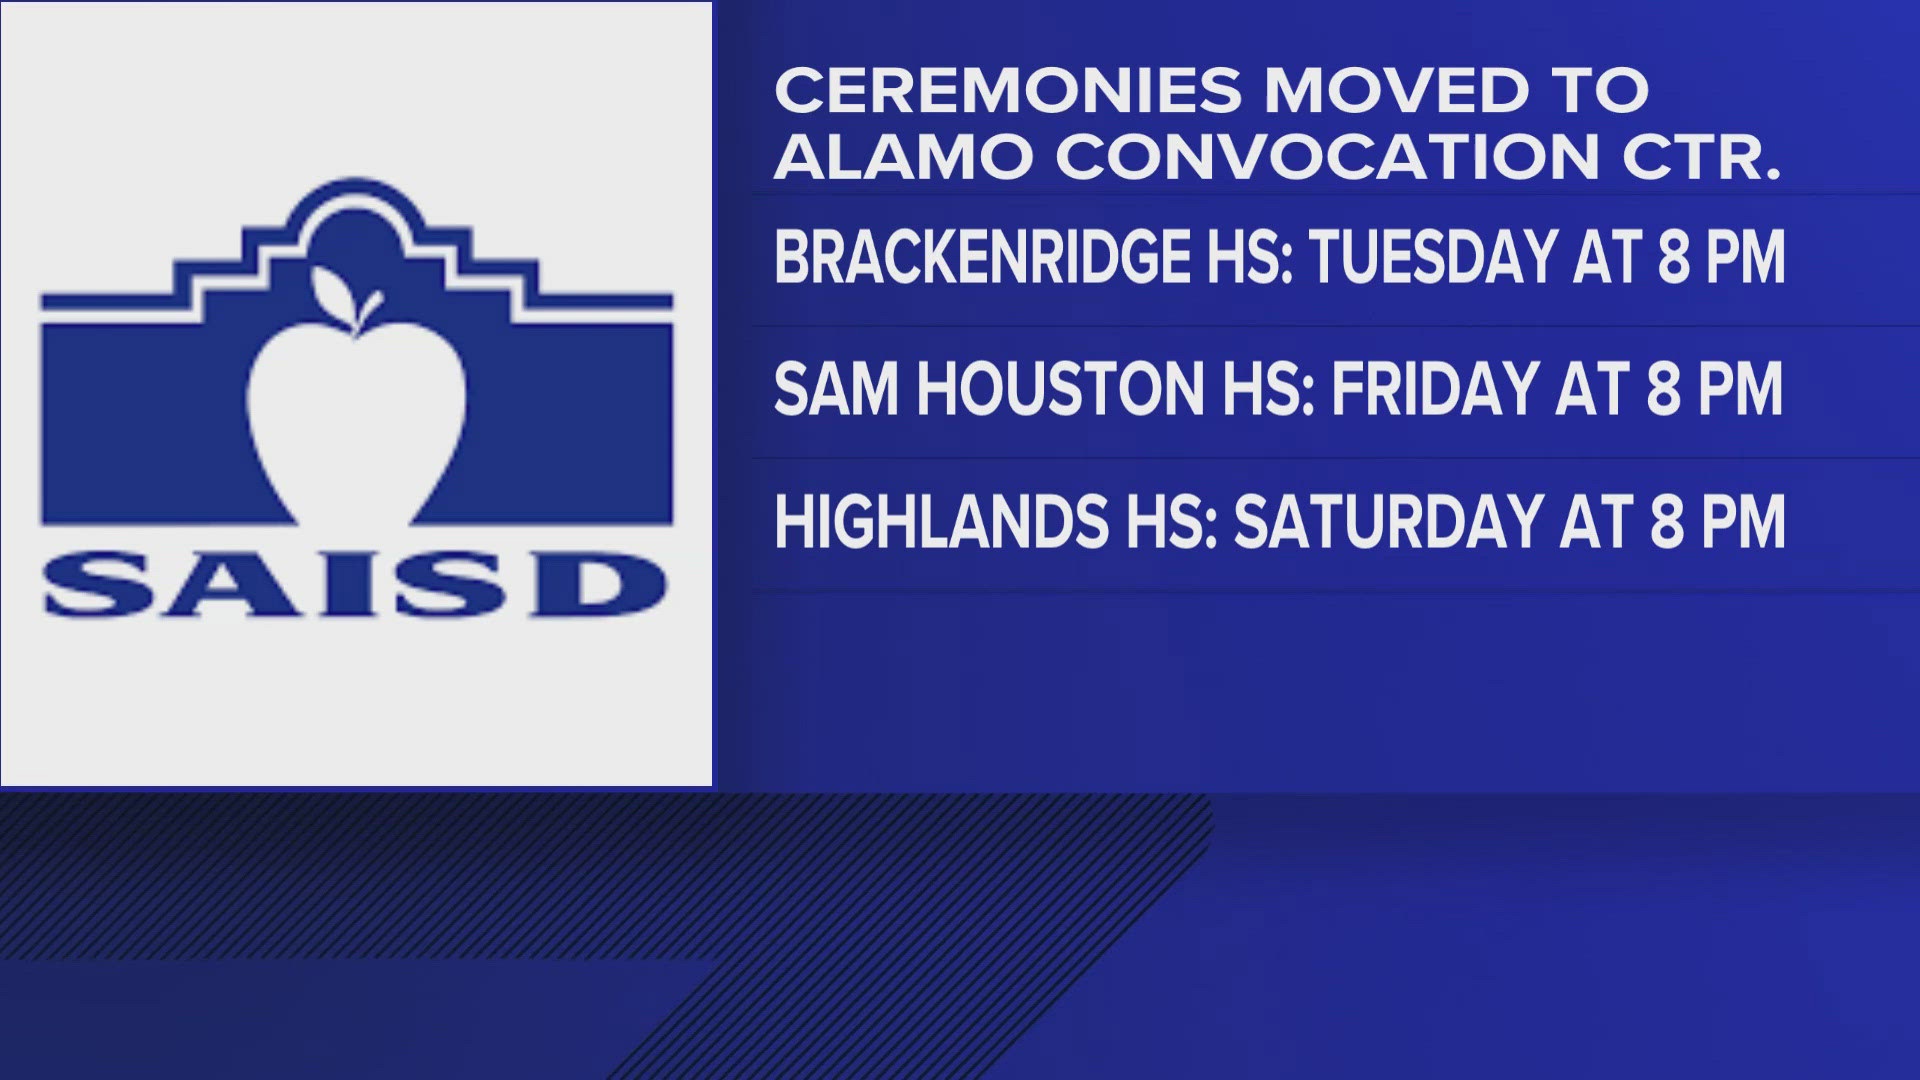 The district is moving ceremonies for Brackenridge, Sam Houston and Highlands High Schools.